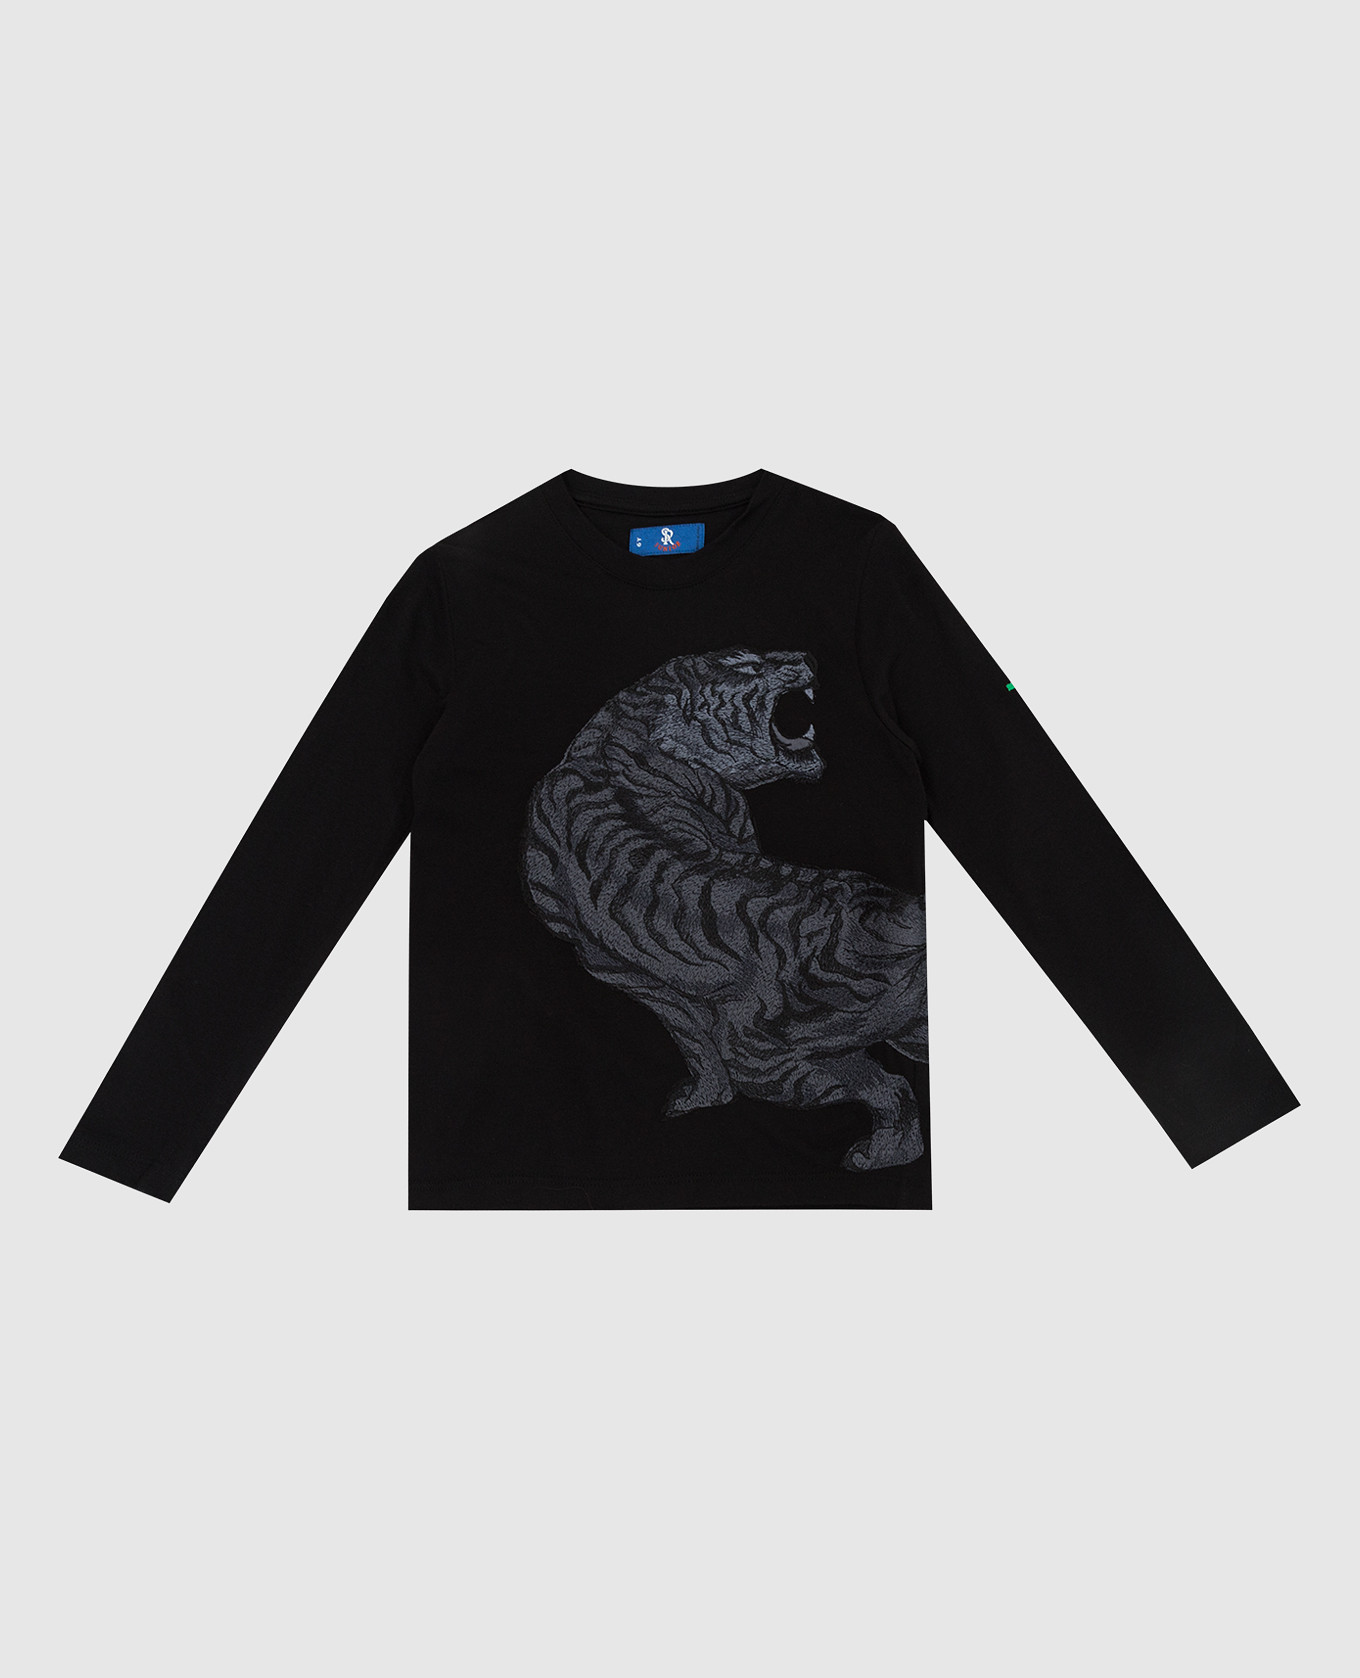 Children's black longsleeve with embroidery